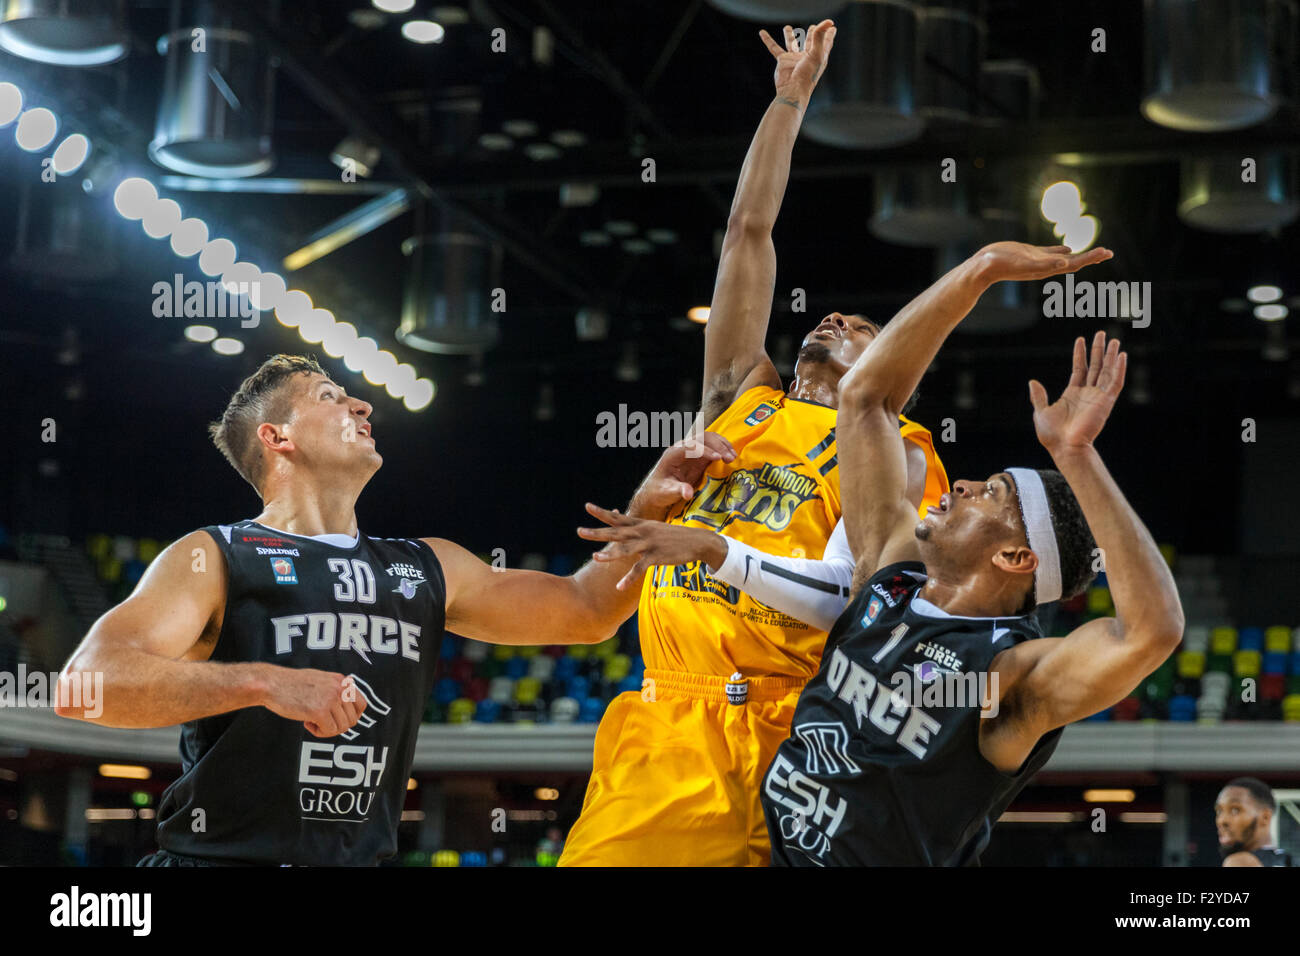 London, UK. 25th Sep, 2015. London, UK.26th September 2015. London Lions' Nick Lewis (m) aims for the basket during the London Lions vs. Leeds Force BBL game at the Copper Box Arena in the Olympic Park. London Lions win 99-60. Credit:  Imageplotter/Alamy Live News Stock Photo